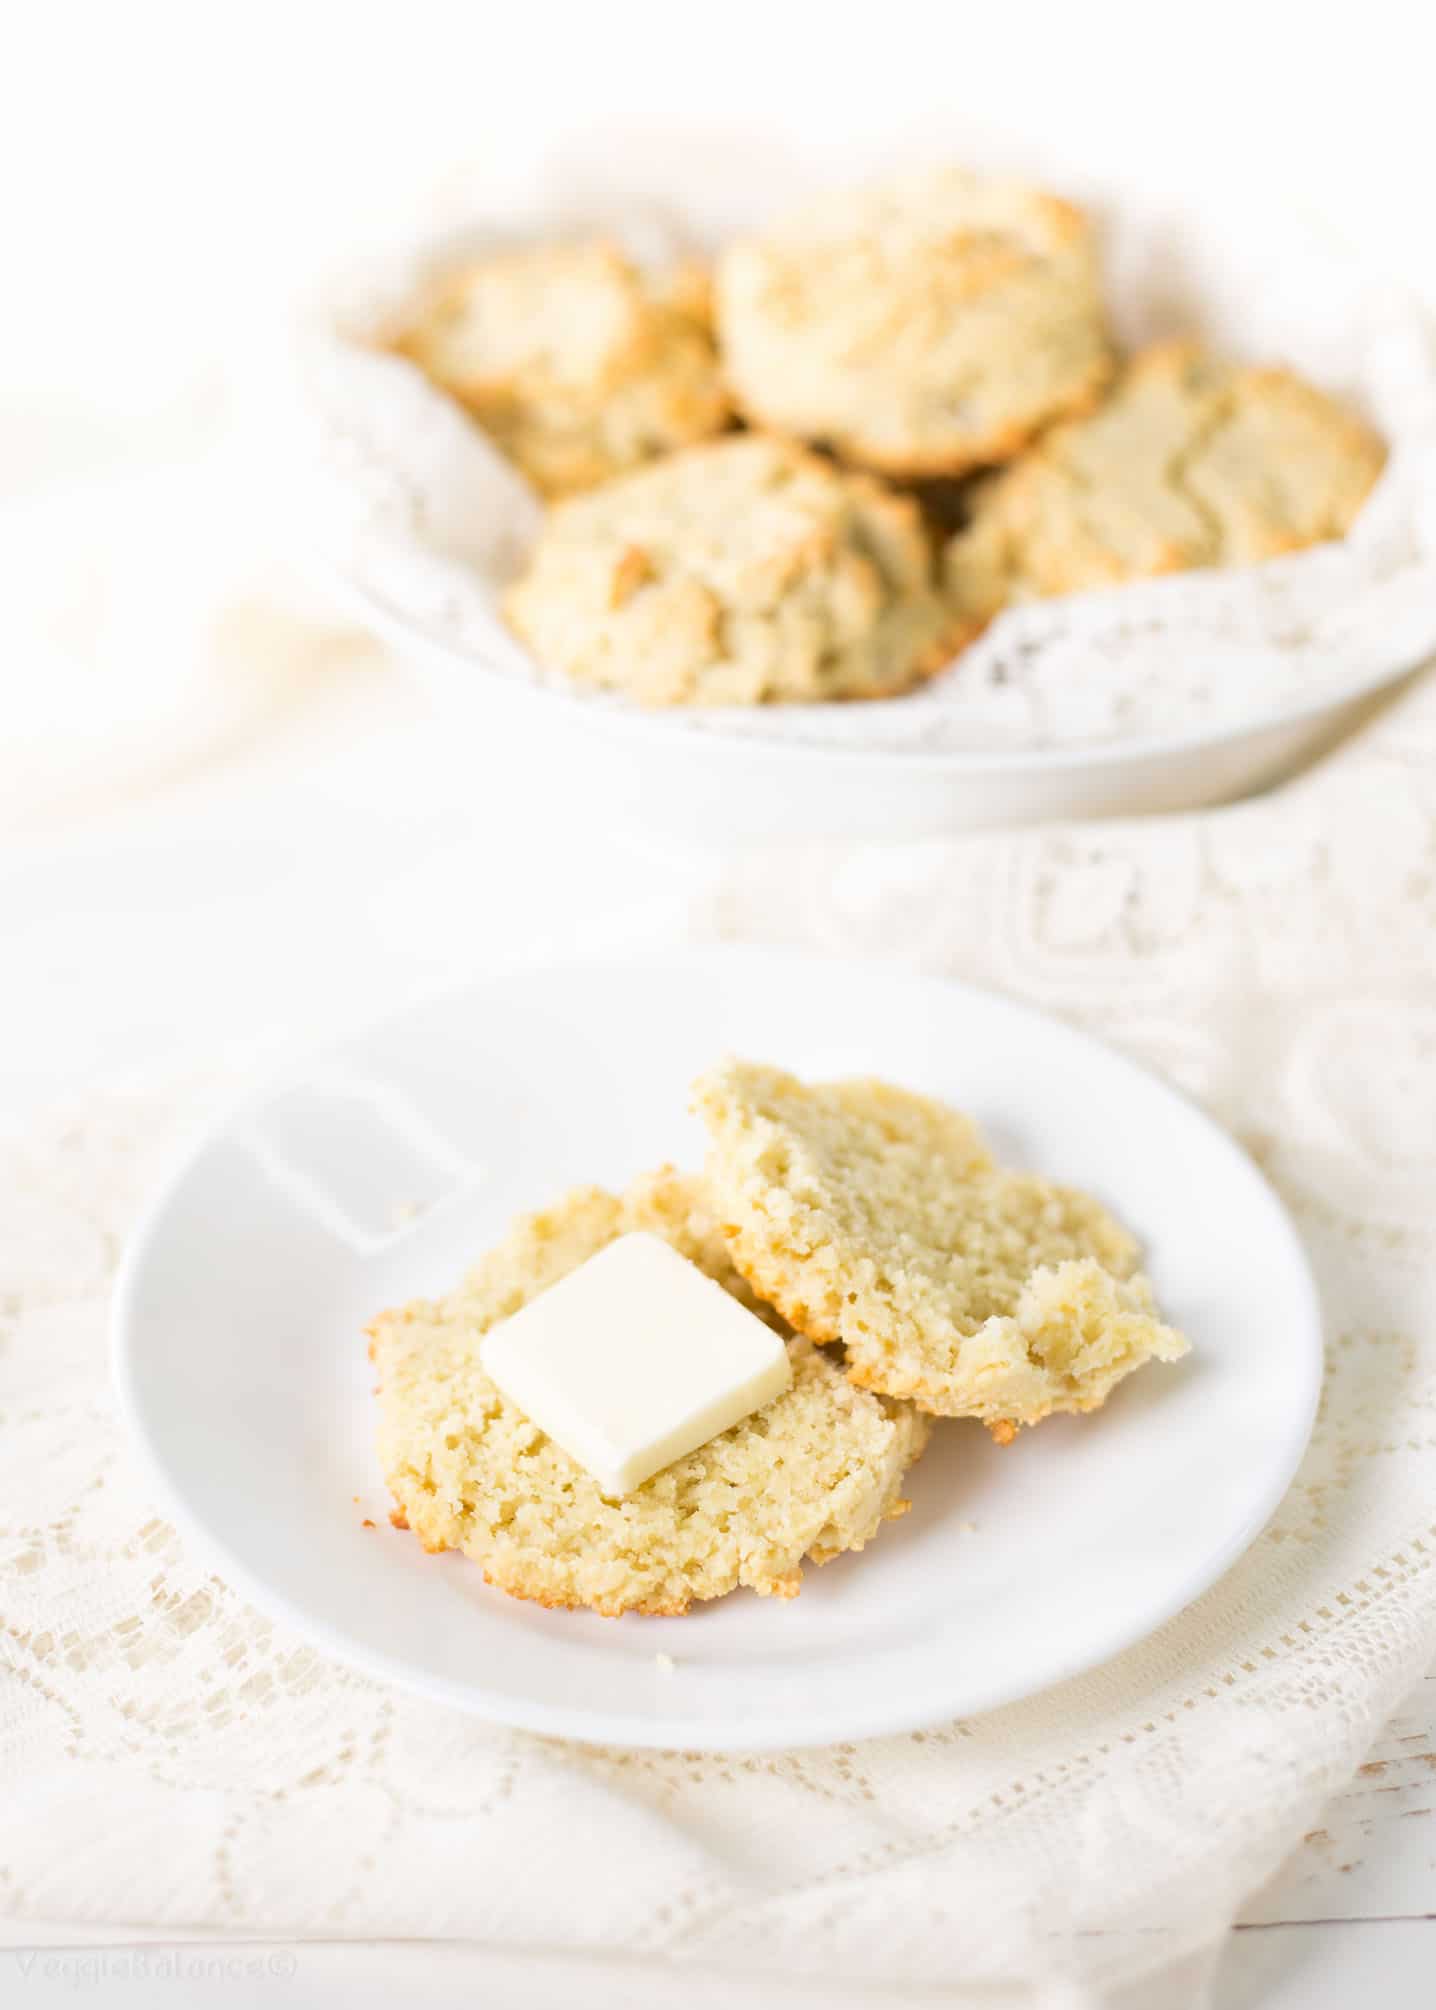 Almond Flour Biscuits (Healthy Low Carb Biscuits)